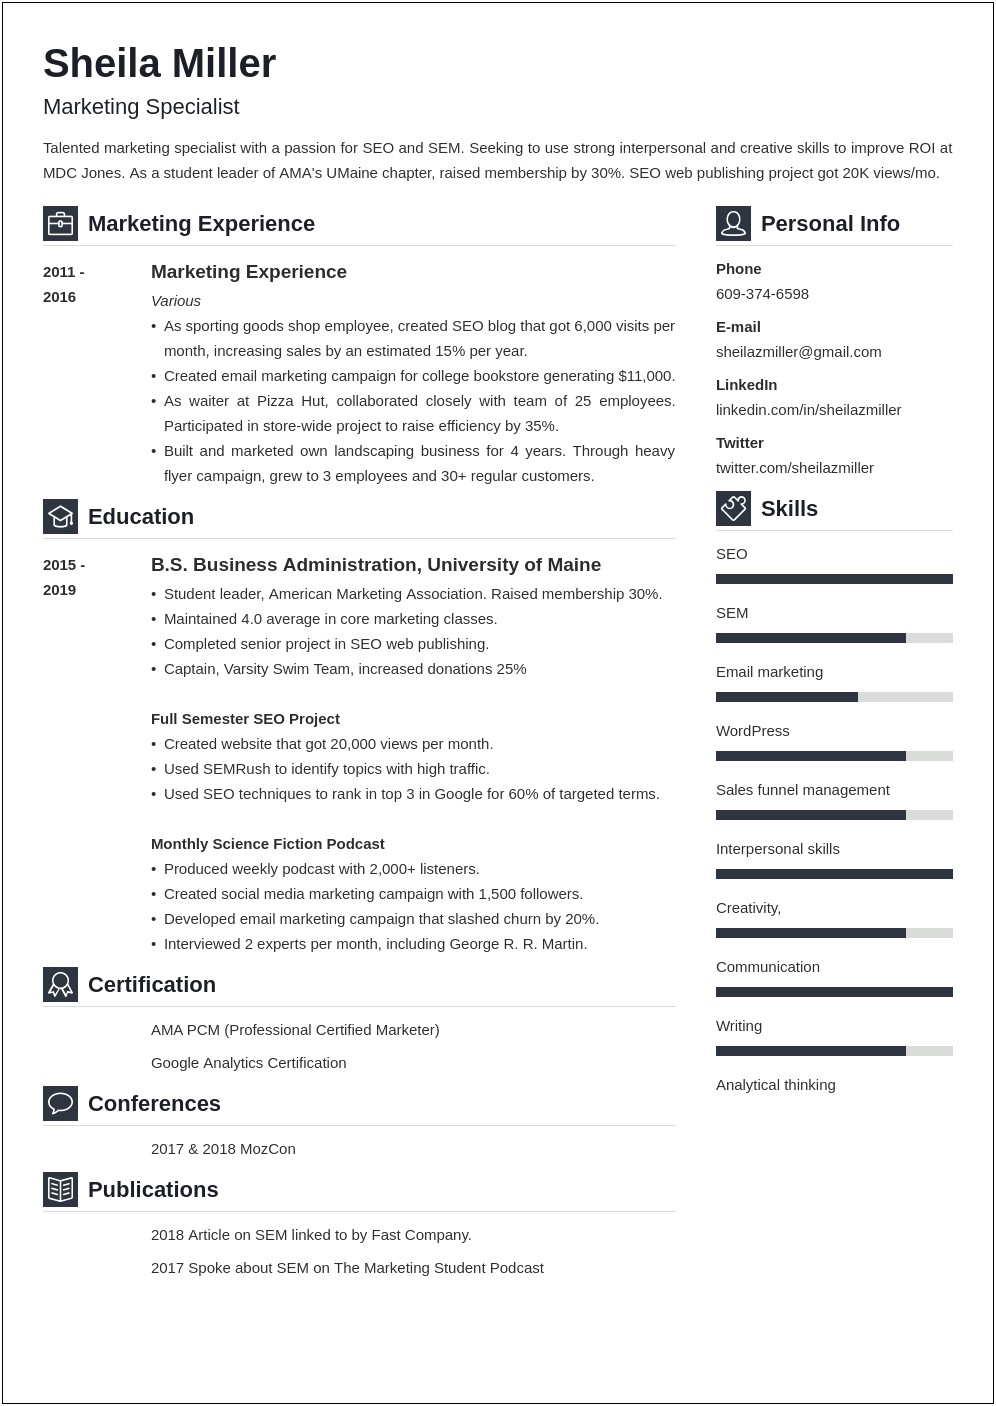 Resume Writing Samples For College Students